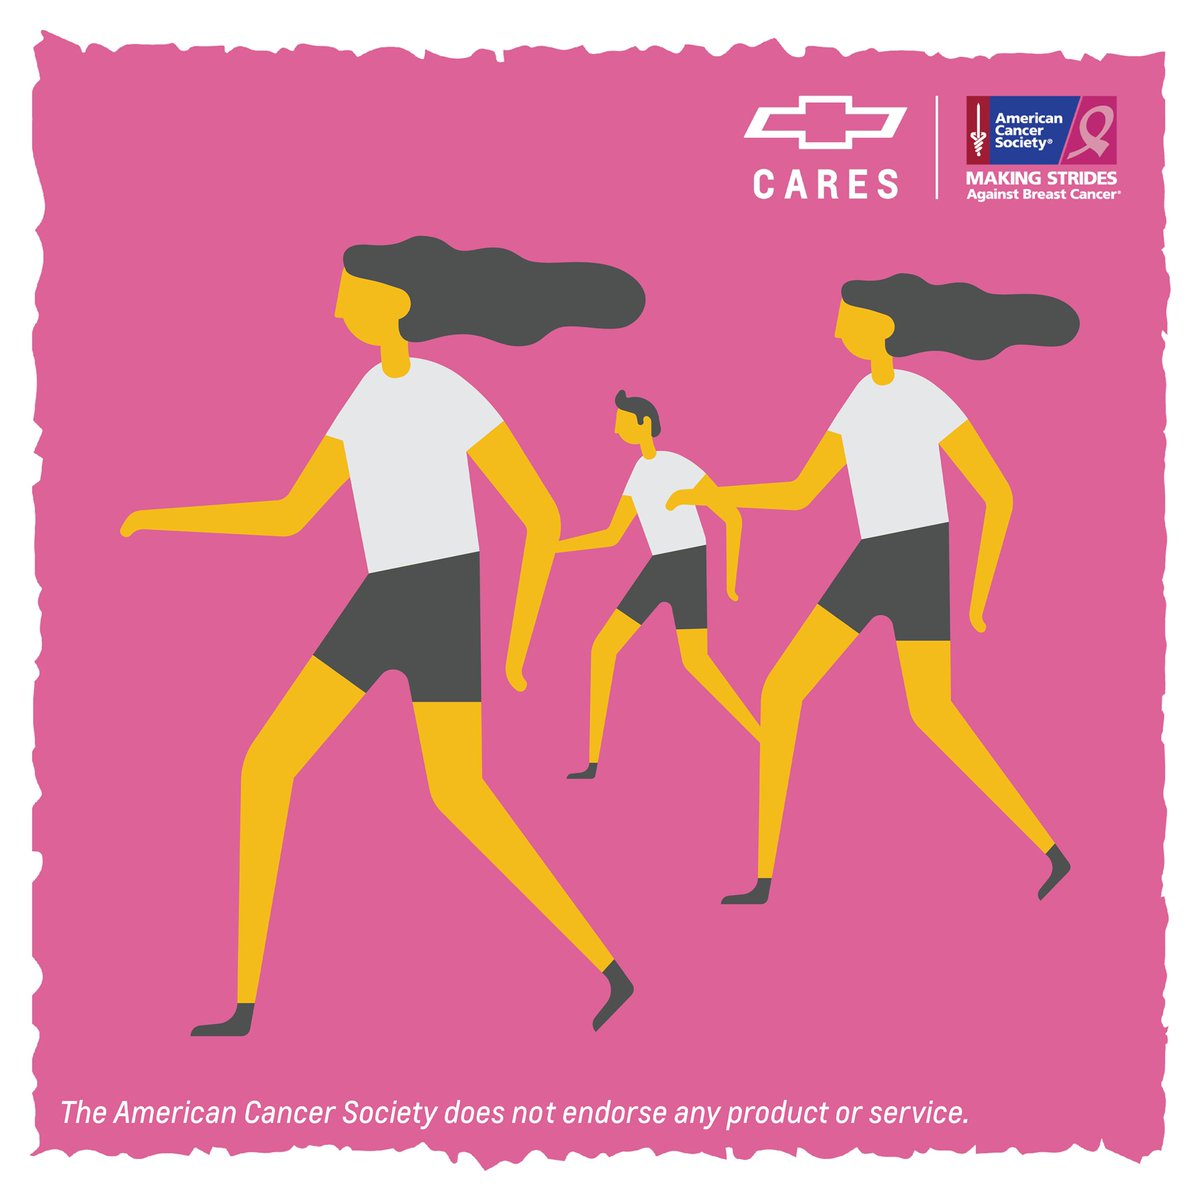 Get your steps in for a cause. Join us at Waterfront Shopping Area, Oct. 20 at 9AM as we walk with @AmericanCancer to help end breast cancer. #IDriveFor